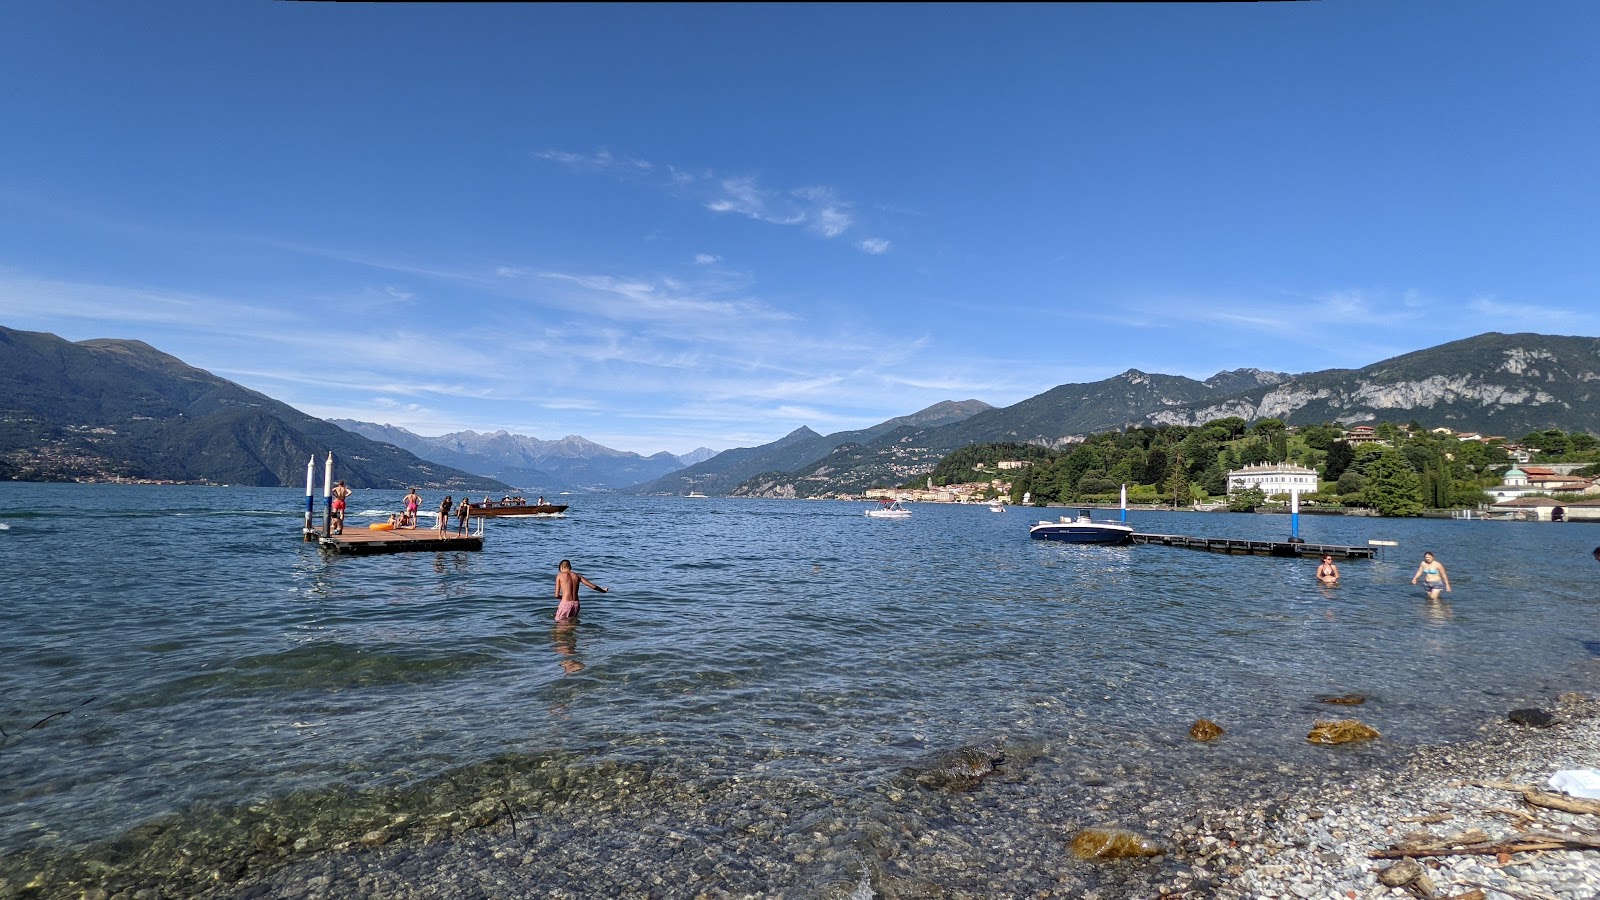 Photo of Spiaggia Pubblica di Bellagio with very clean level of cleanliness